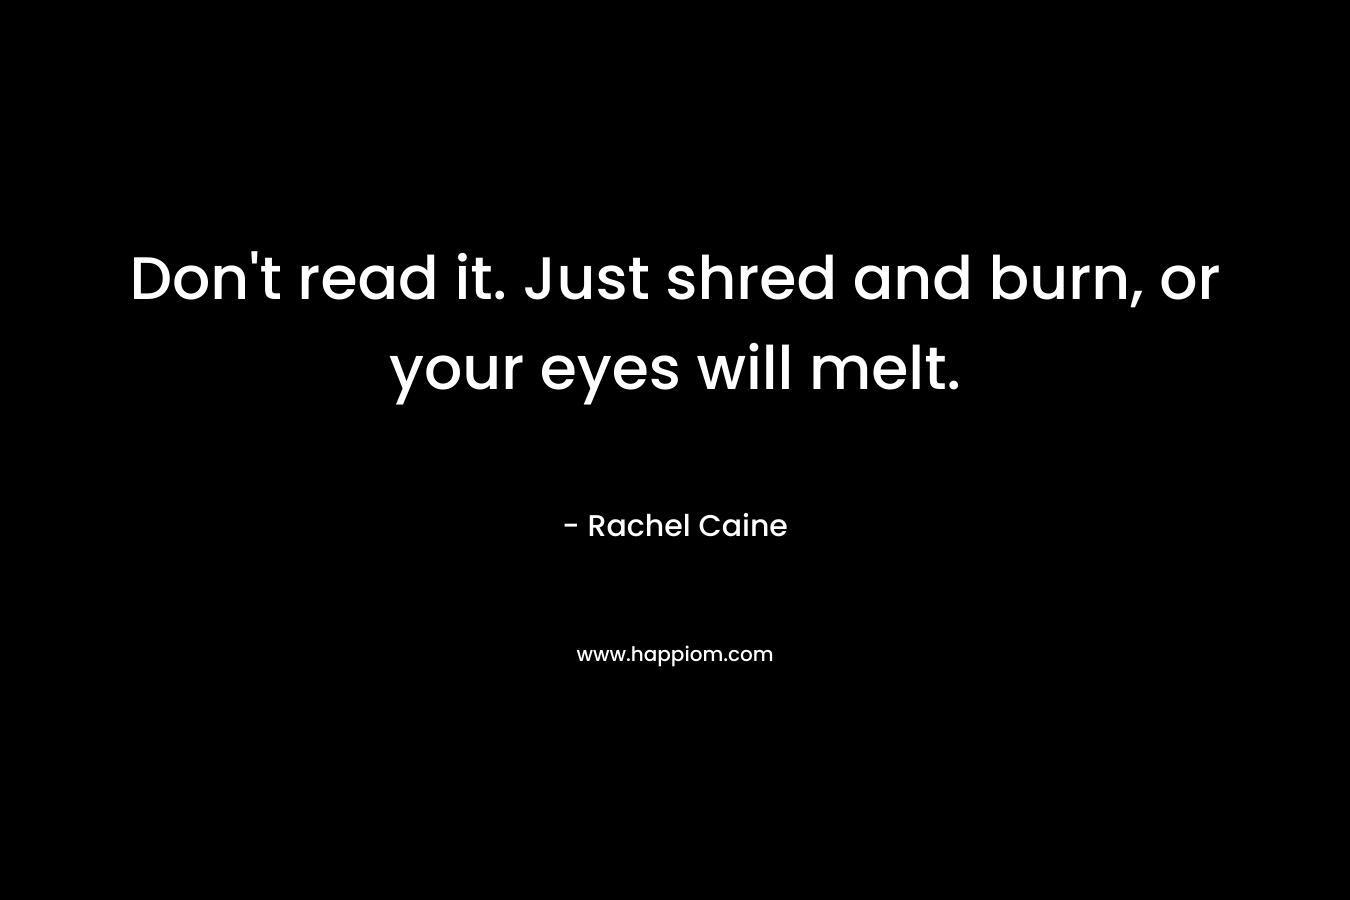 Don’t read it. Just shred and burn, or your eyes will melt. – Rachel Caine